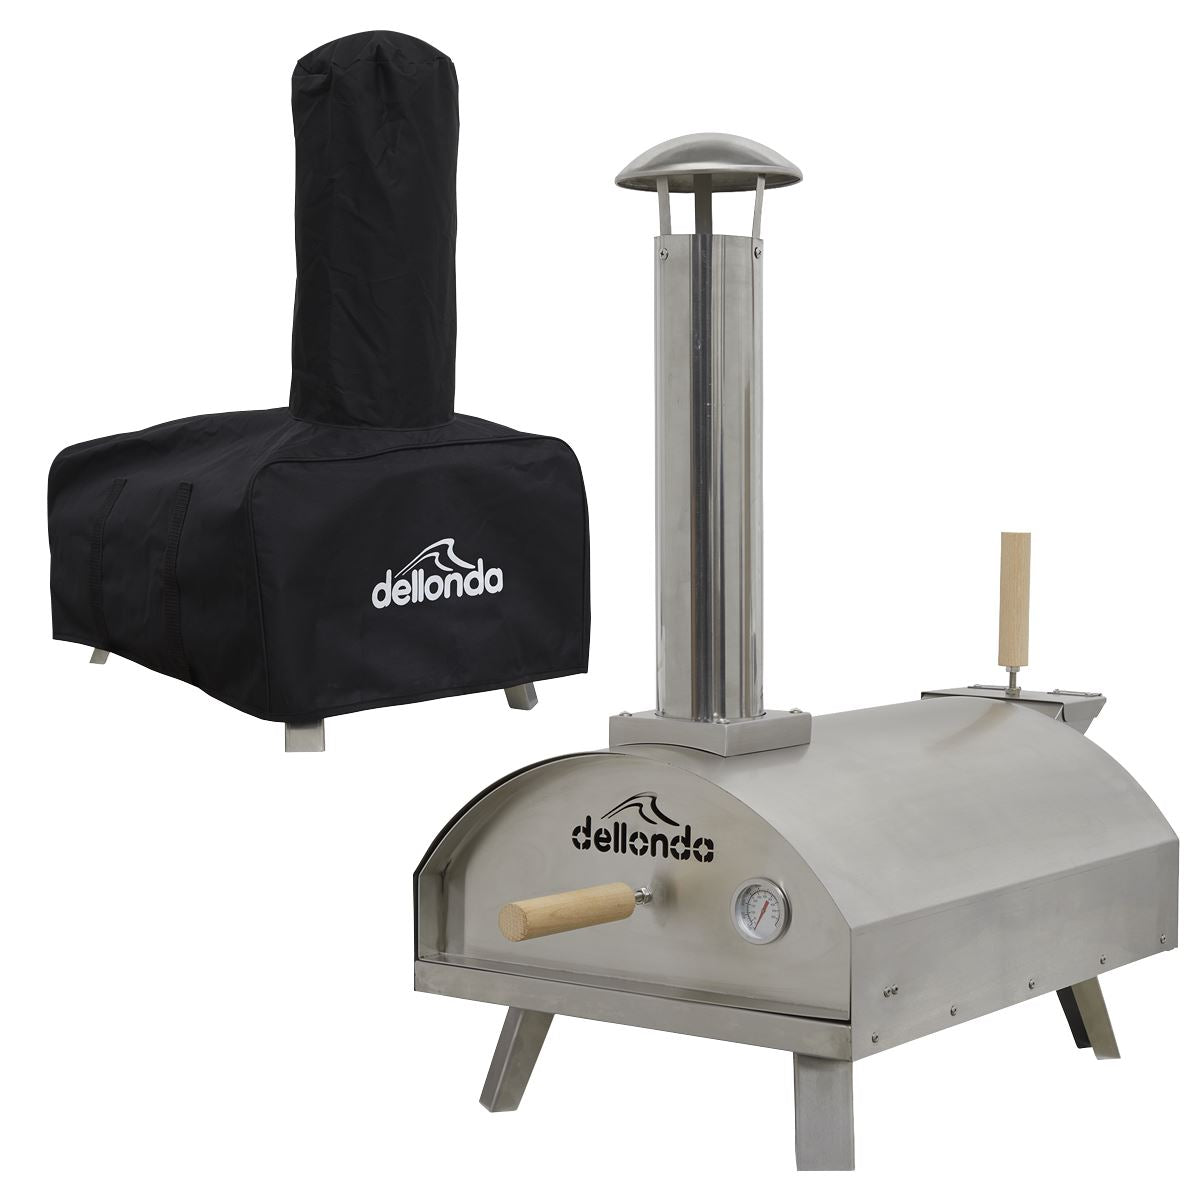 Dellonda Portable Wood-Fired Pizza Oven and Smoking Oven, Stainless Steel, Supplied with Weatherproof Cover/Carry Bag